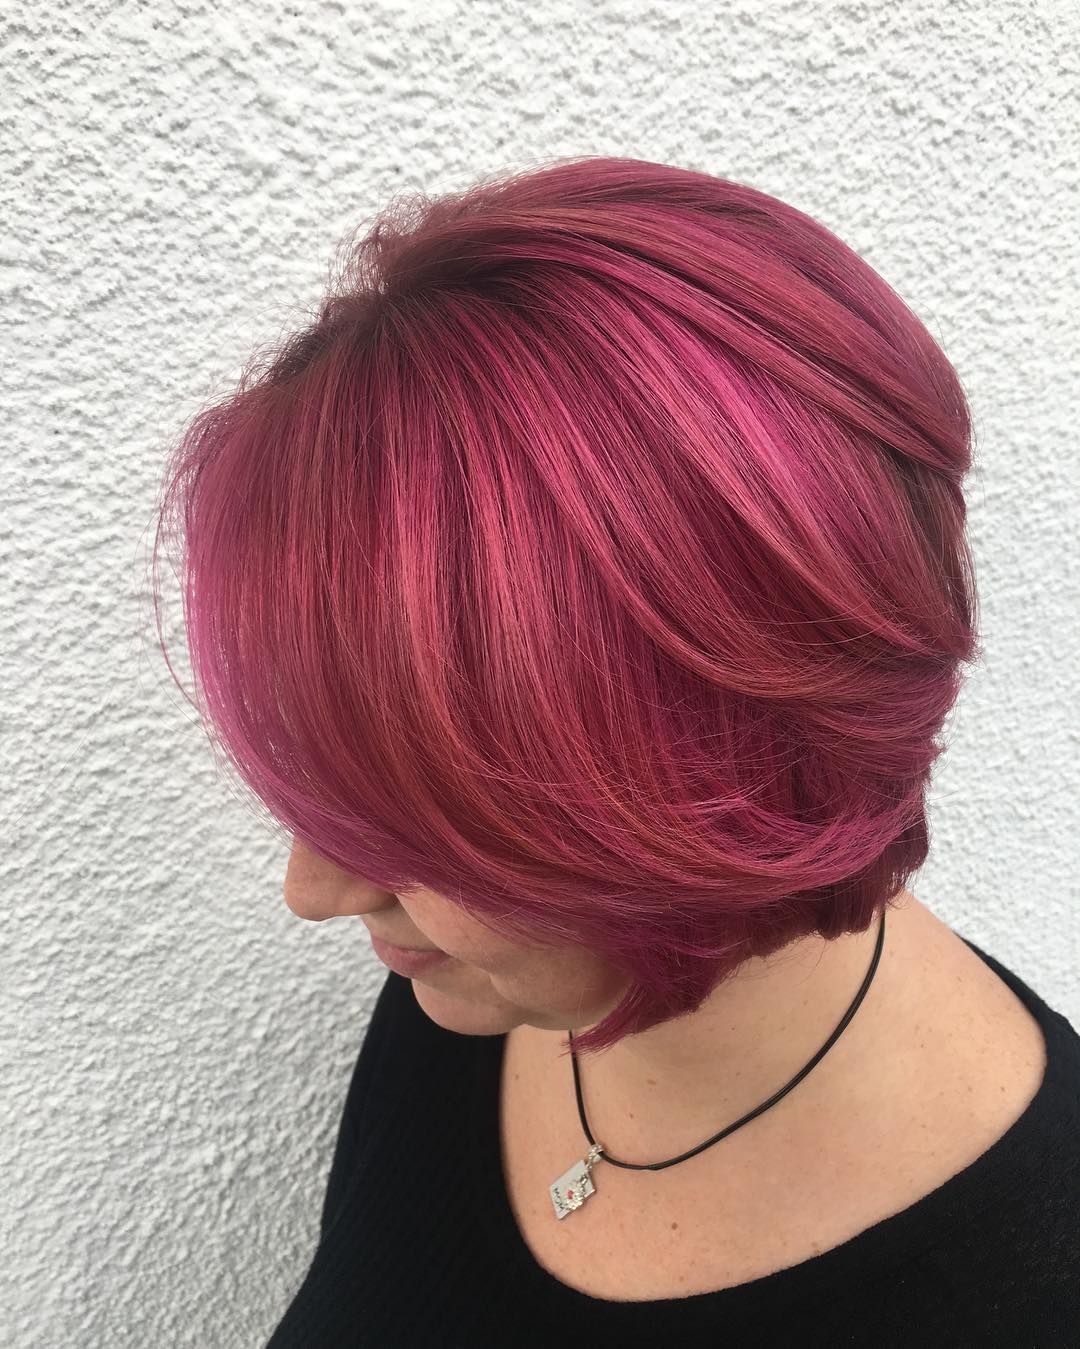 Vibrant and Eye-catching Magenta Hair Inspiration